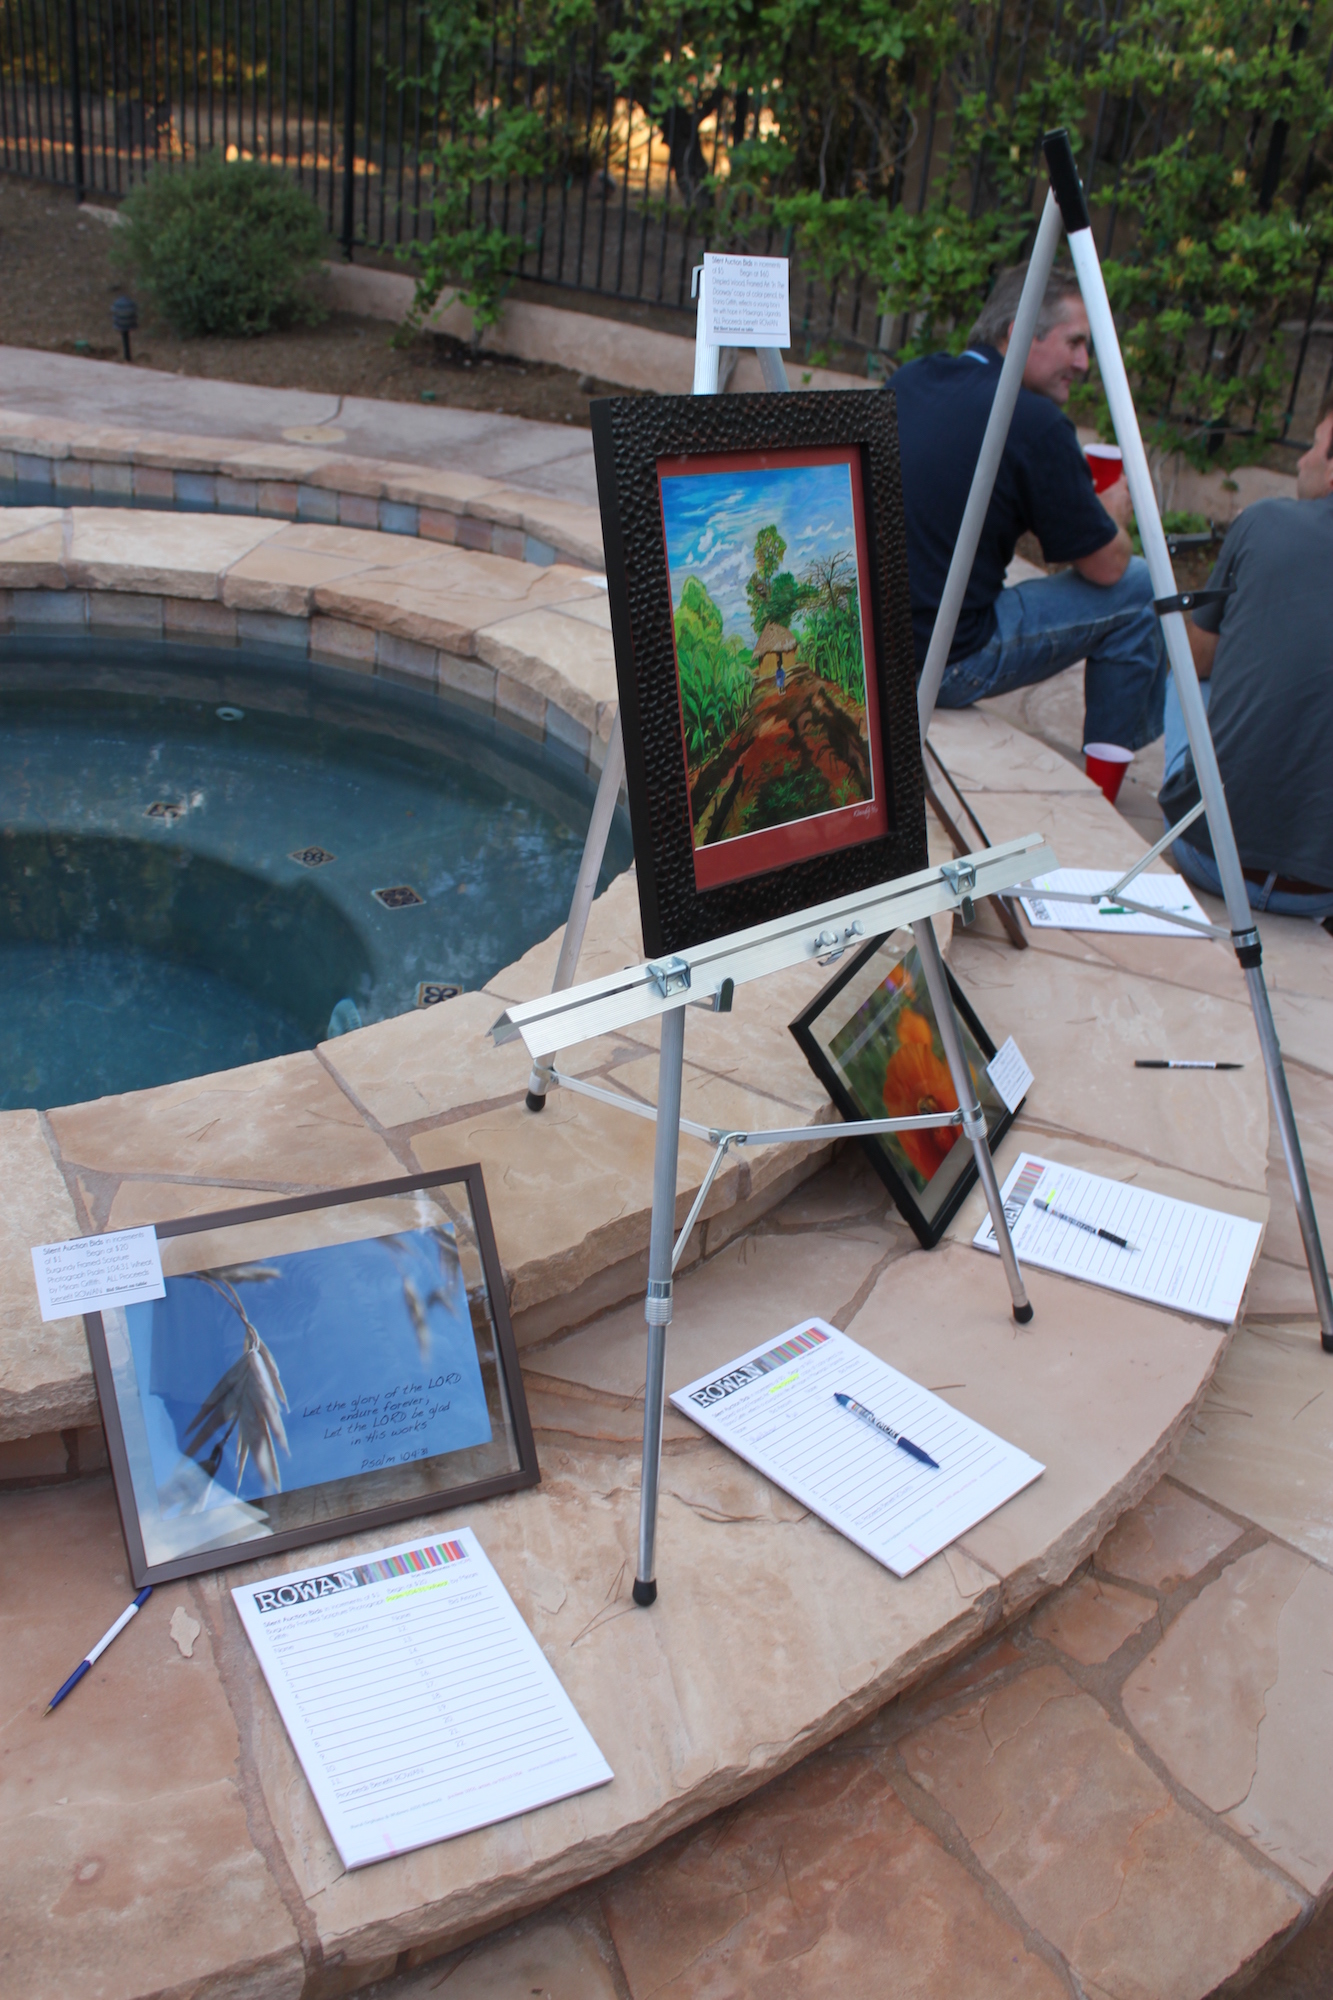 Artwork on easels around a jacuzzi